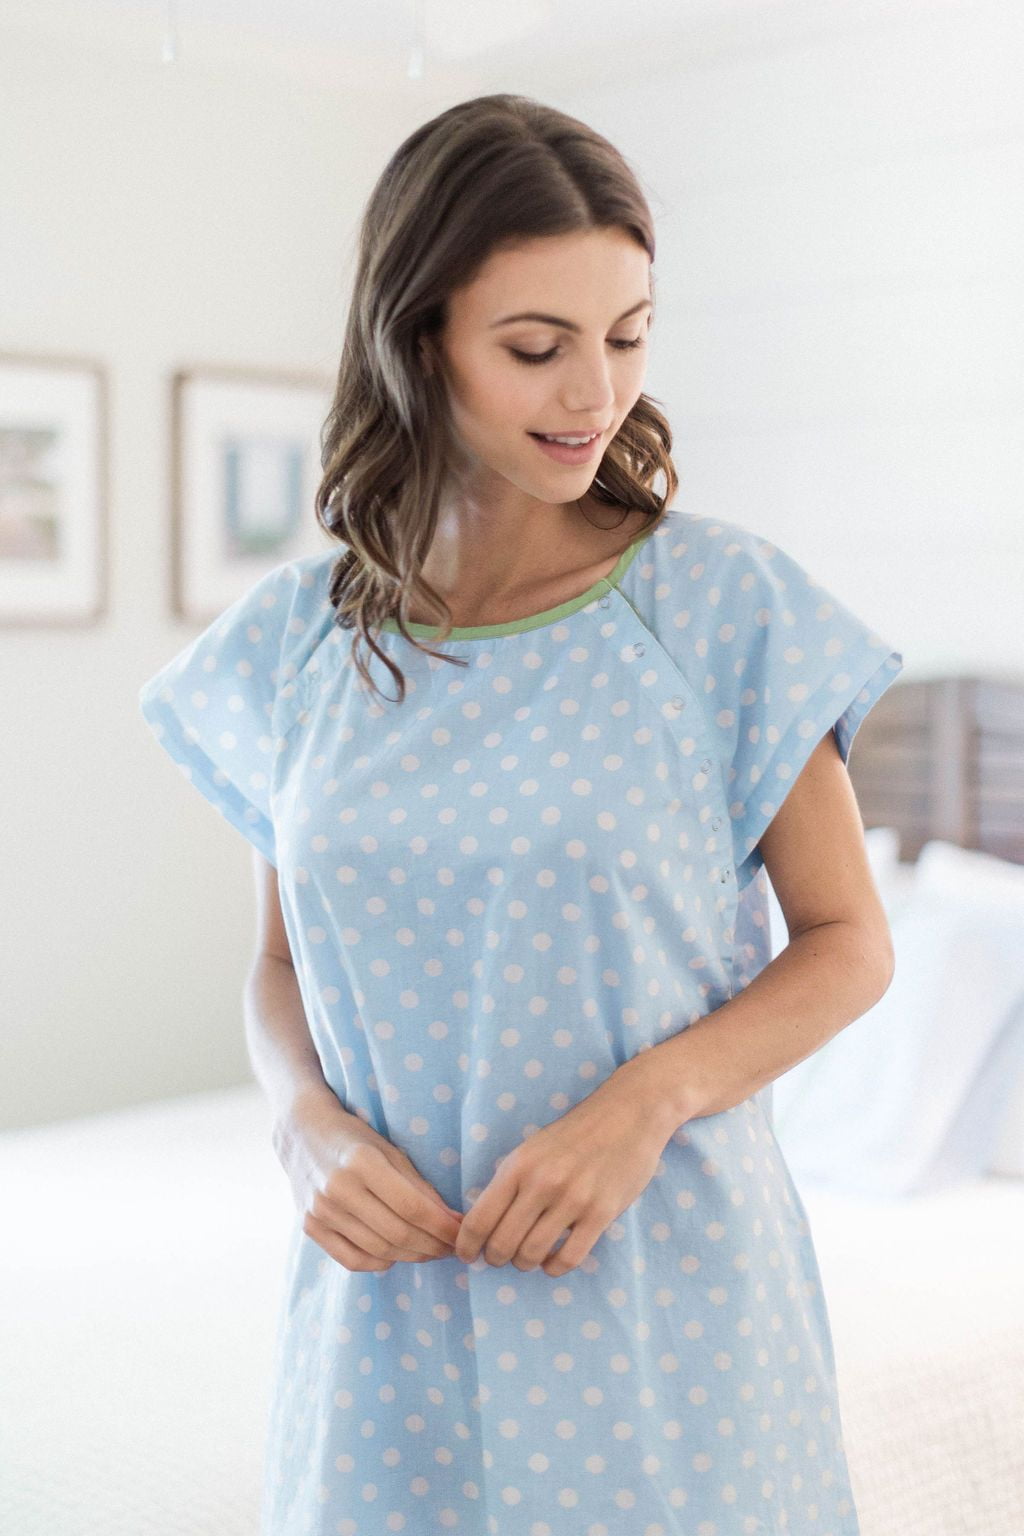 Disposable Hospital Gowns Could Expose Health Workers to Infection |  Scientific American